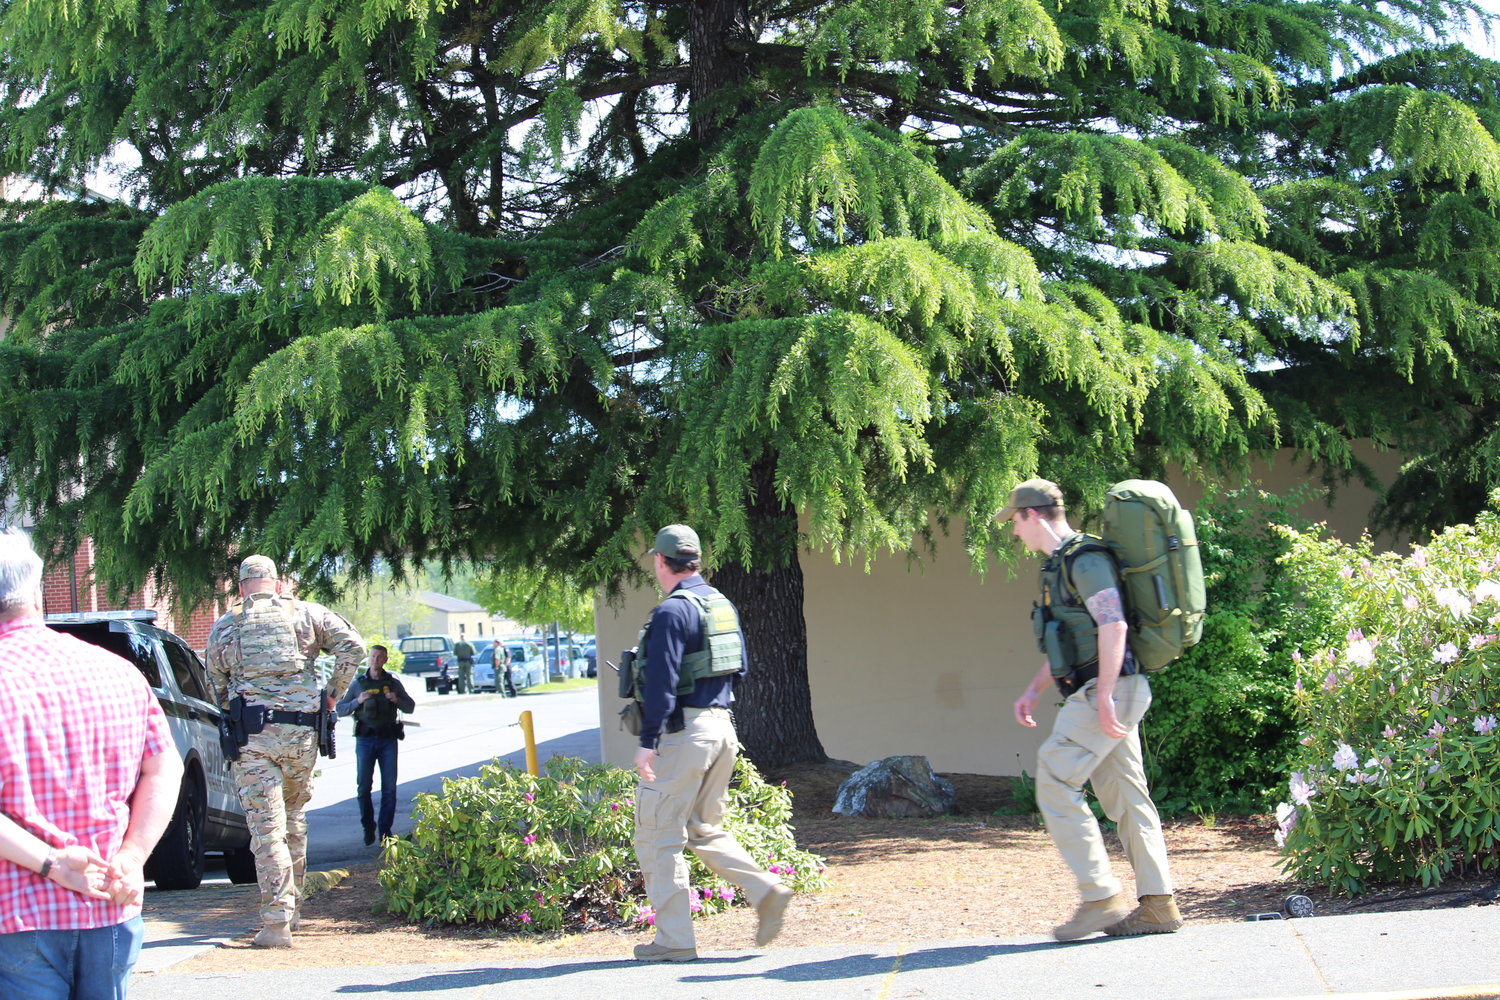 U.S. Border Patrol agents surround Blaine school district’s main campus on May 25. U.S. Border Patrol, U.S. Customs and Border Protection, Whatcom County Sheriff’s Office and Blaine Police Department responded to the school district’s threat.